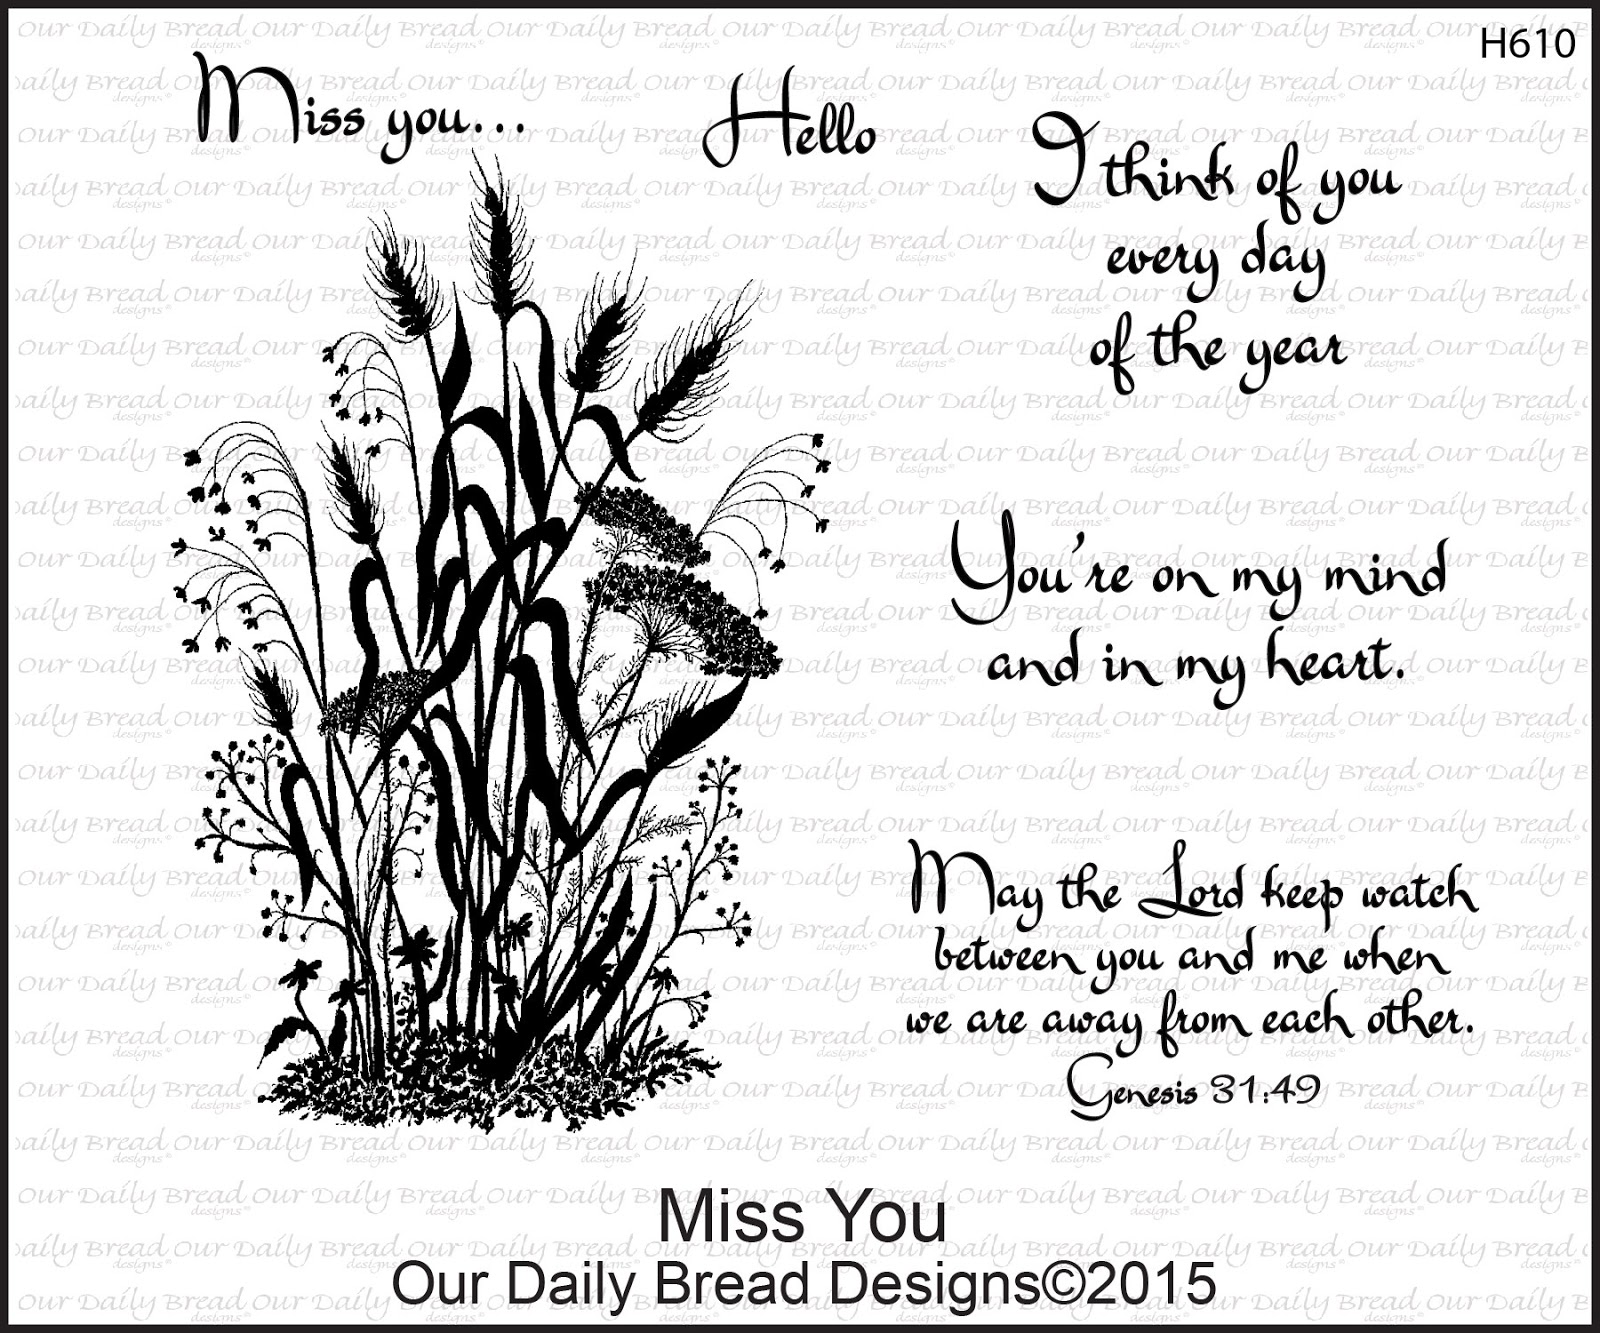 Stamps - Our Daily Bread Designs Miss You